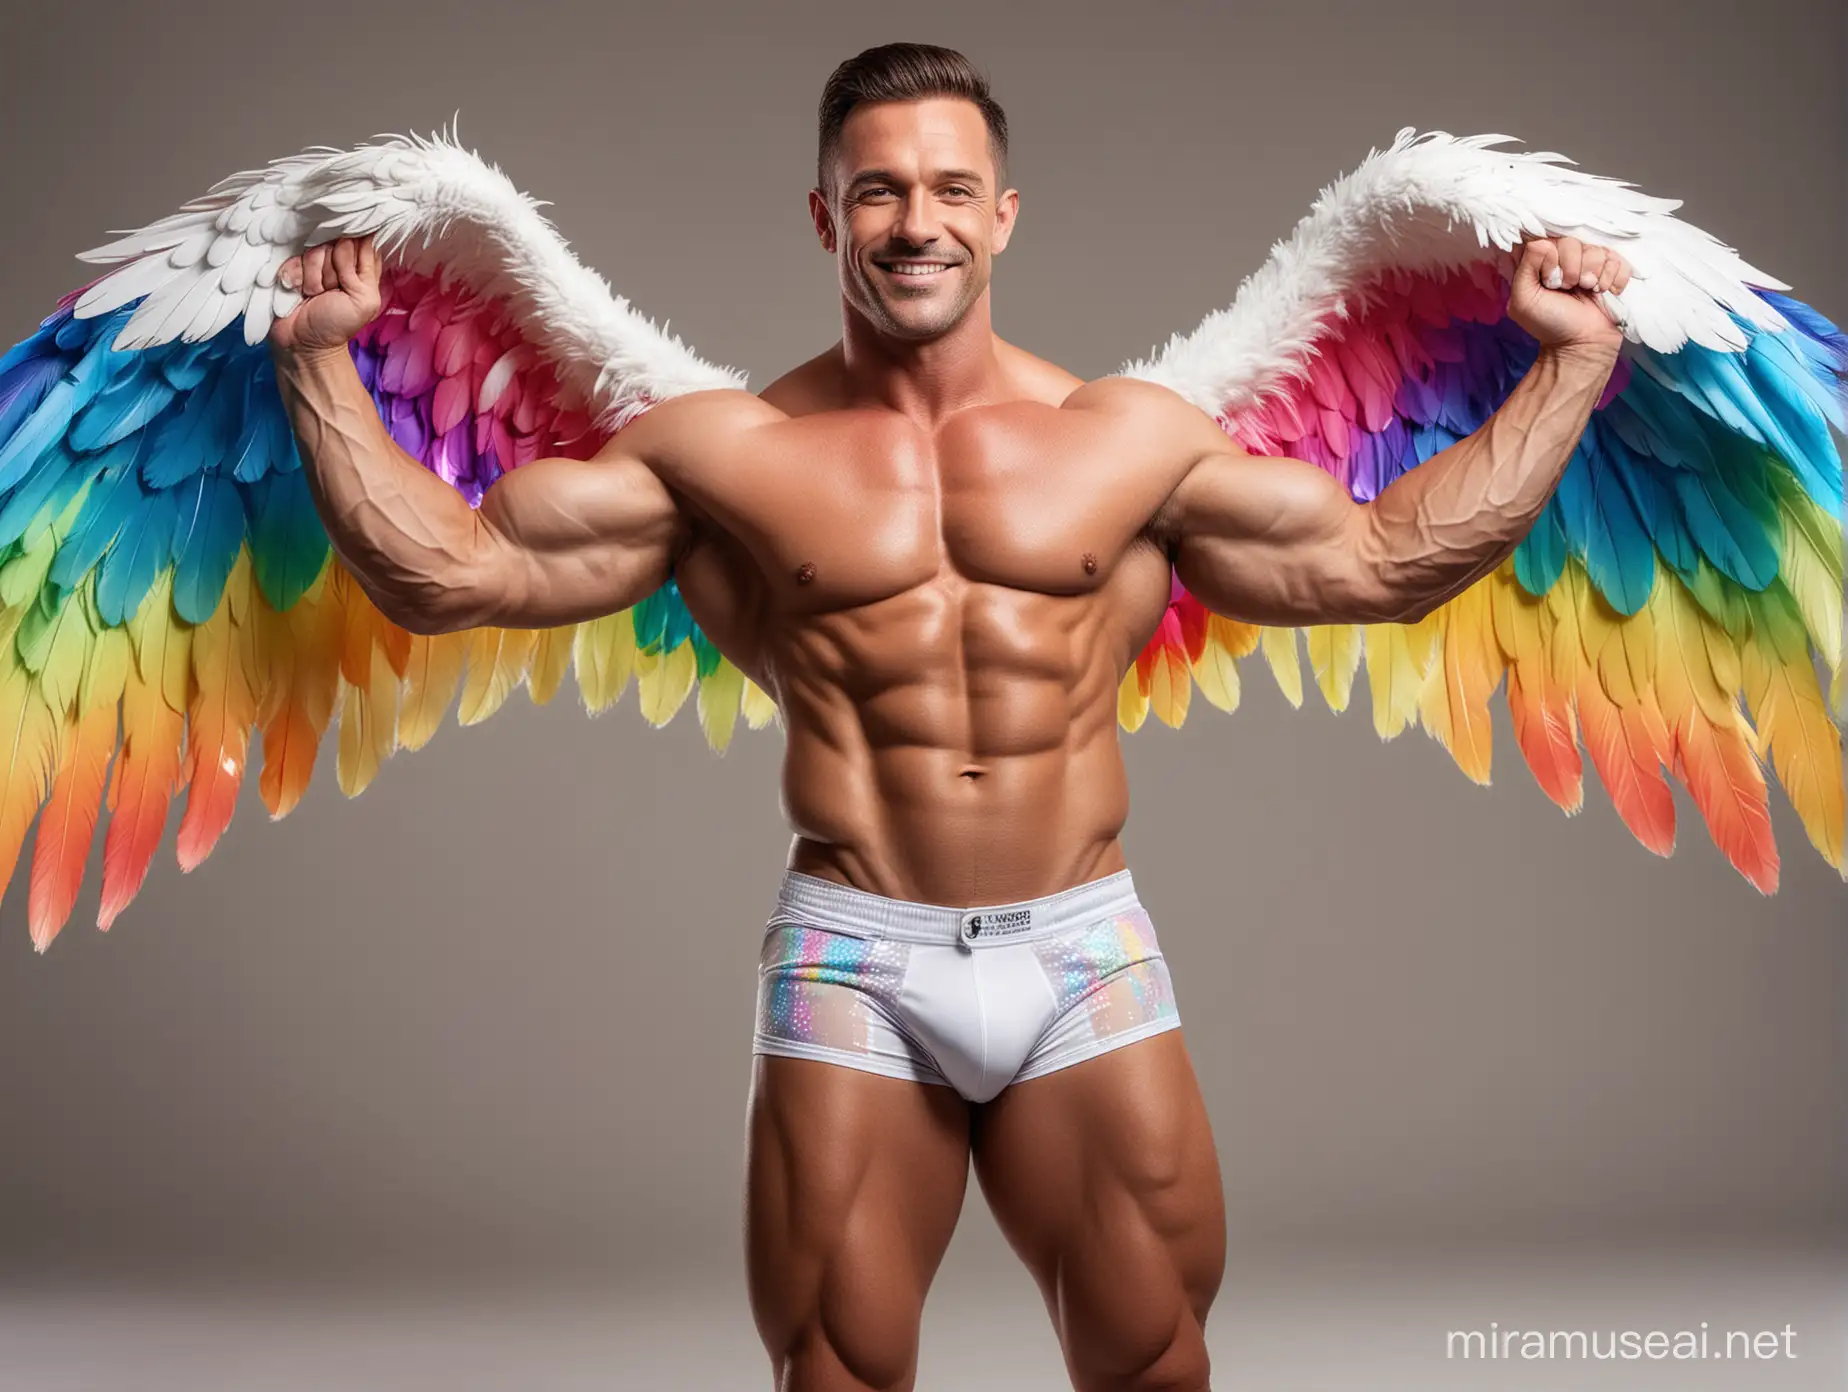 Ultra Chunky IFBB Bodybuilder Flexing Bicep Pose with Rainbow LED Jacket and Eagle Wings